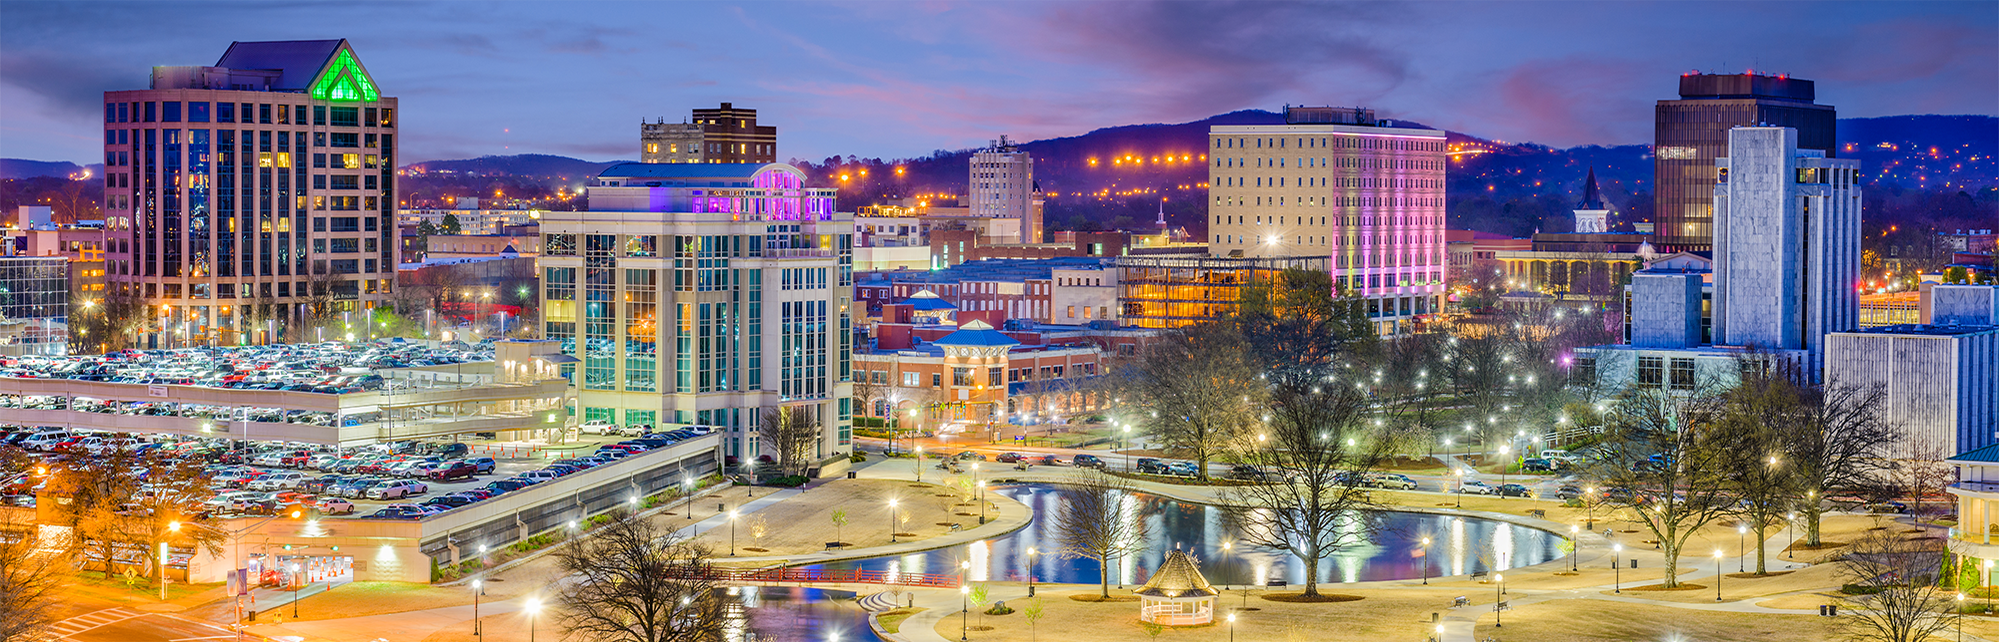 Huntsville, Alabama, USA park and downtown cityscape at twilight